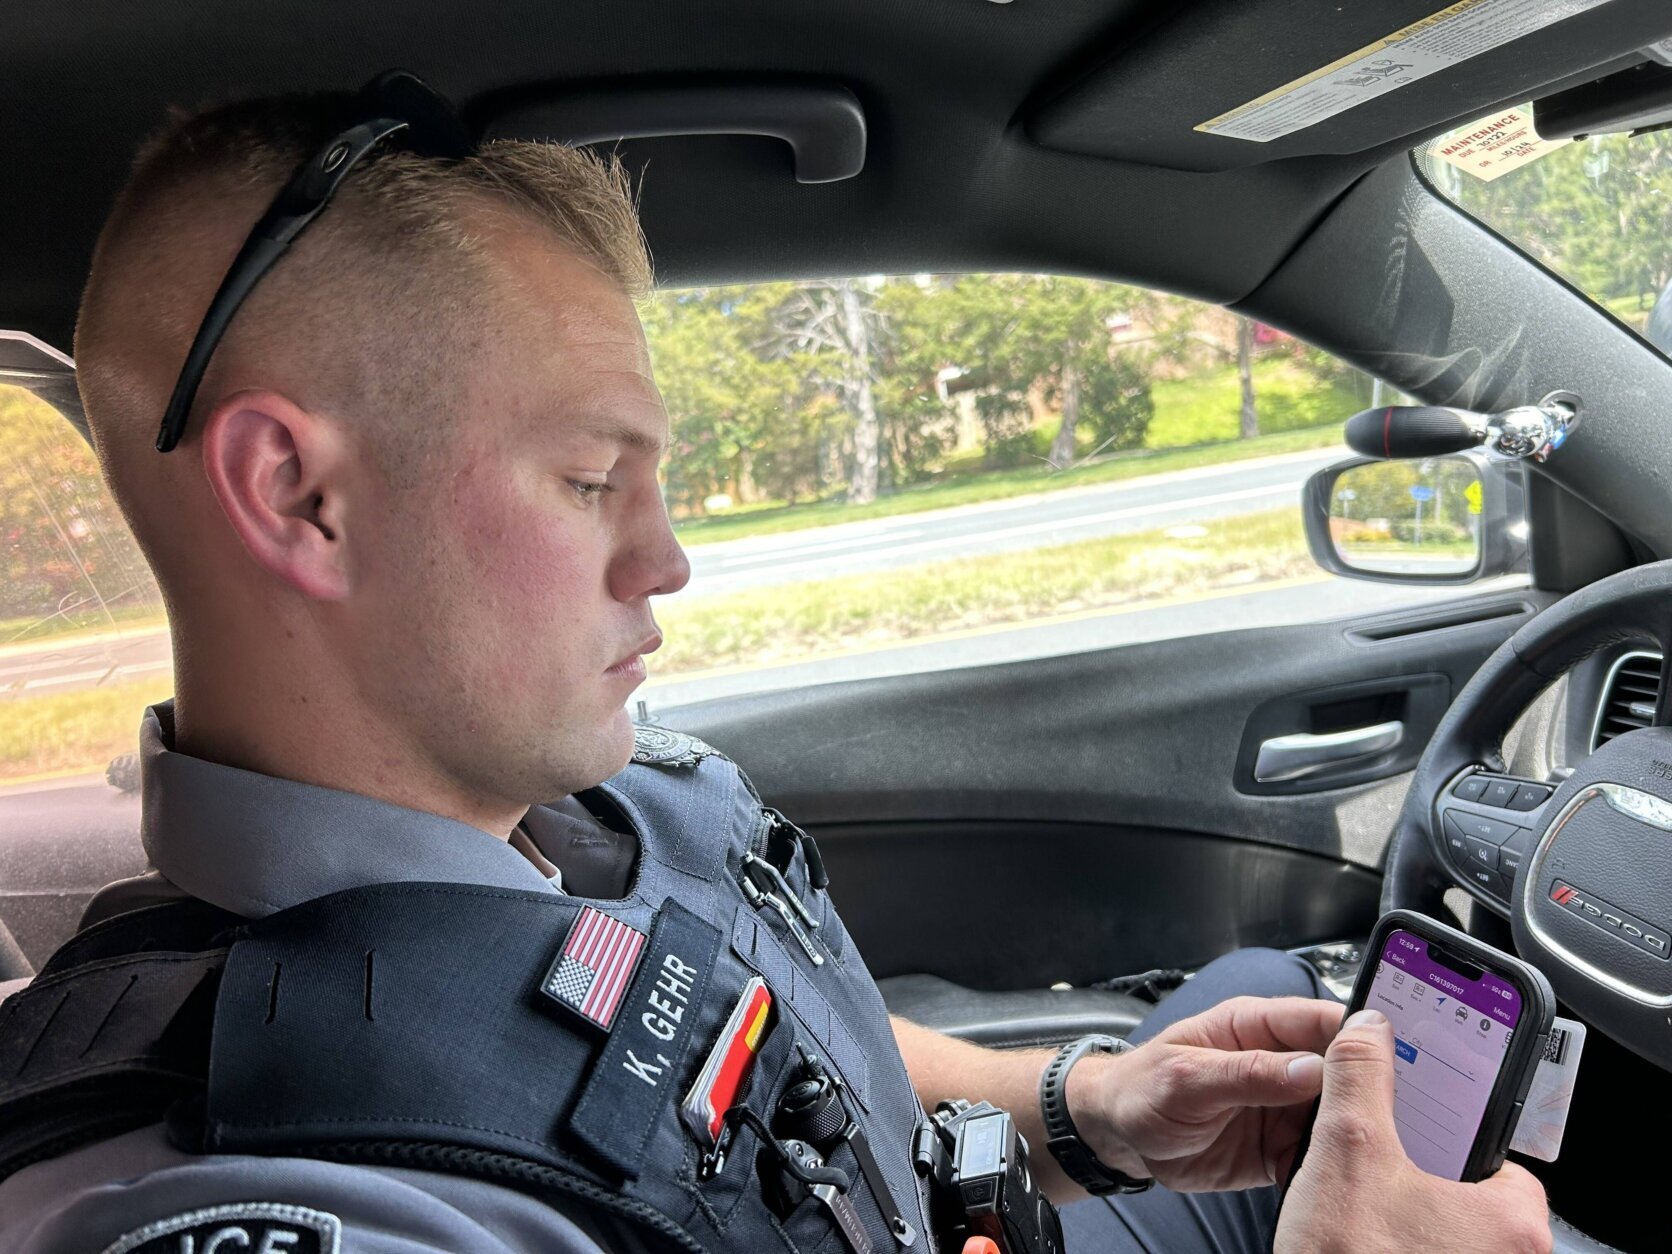 Fairfax County police officer Kevin Gehr says the goal of the "Road Shark" initiative is to crack down on speeding and distracted driving. (WTOP/Scott Gelman)